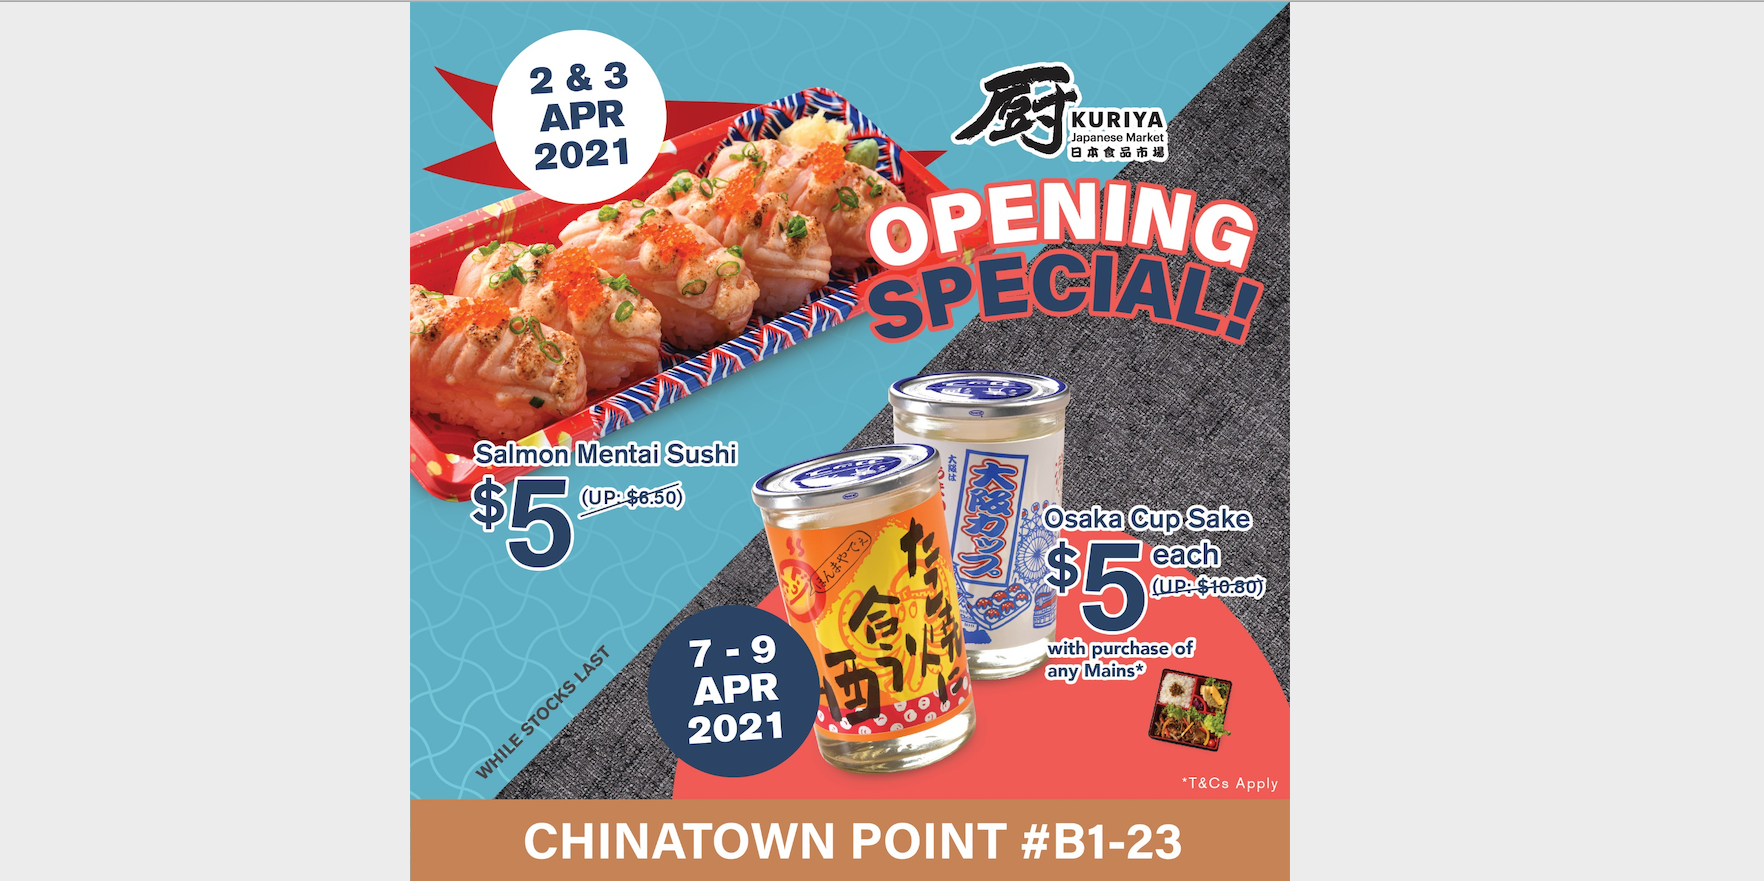 Kuriya Japanese Market Opens 11th Outlet at Chinatown Point with $5 Sushi & Sake Deals!